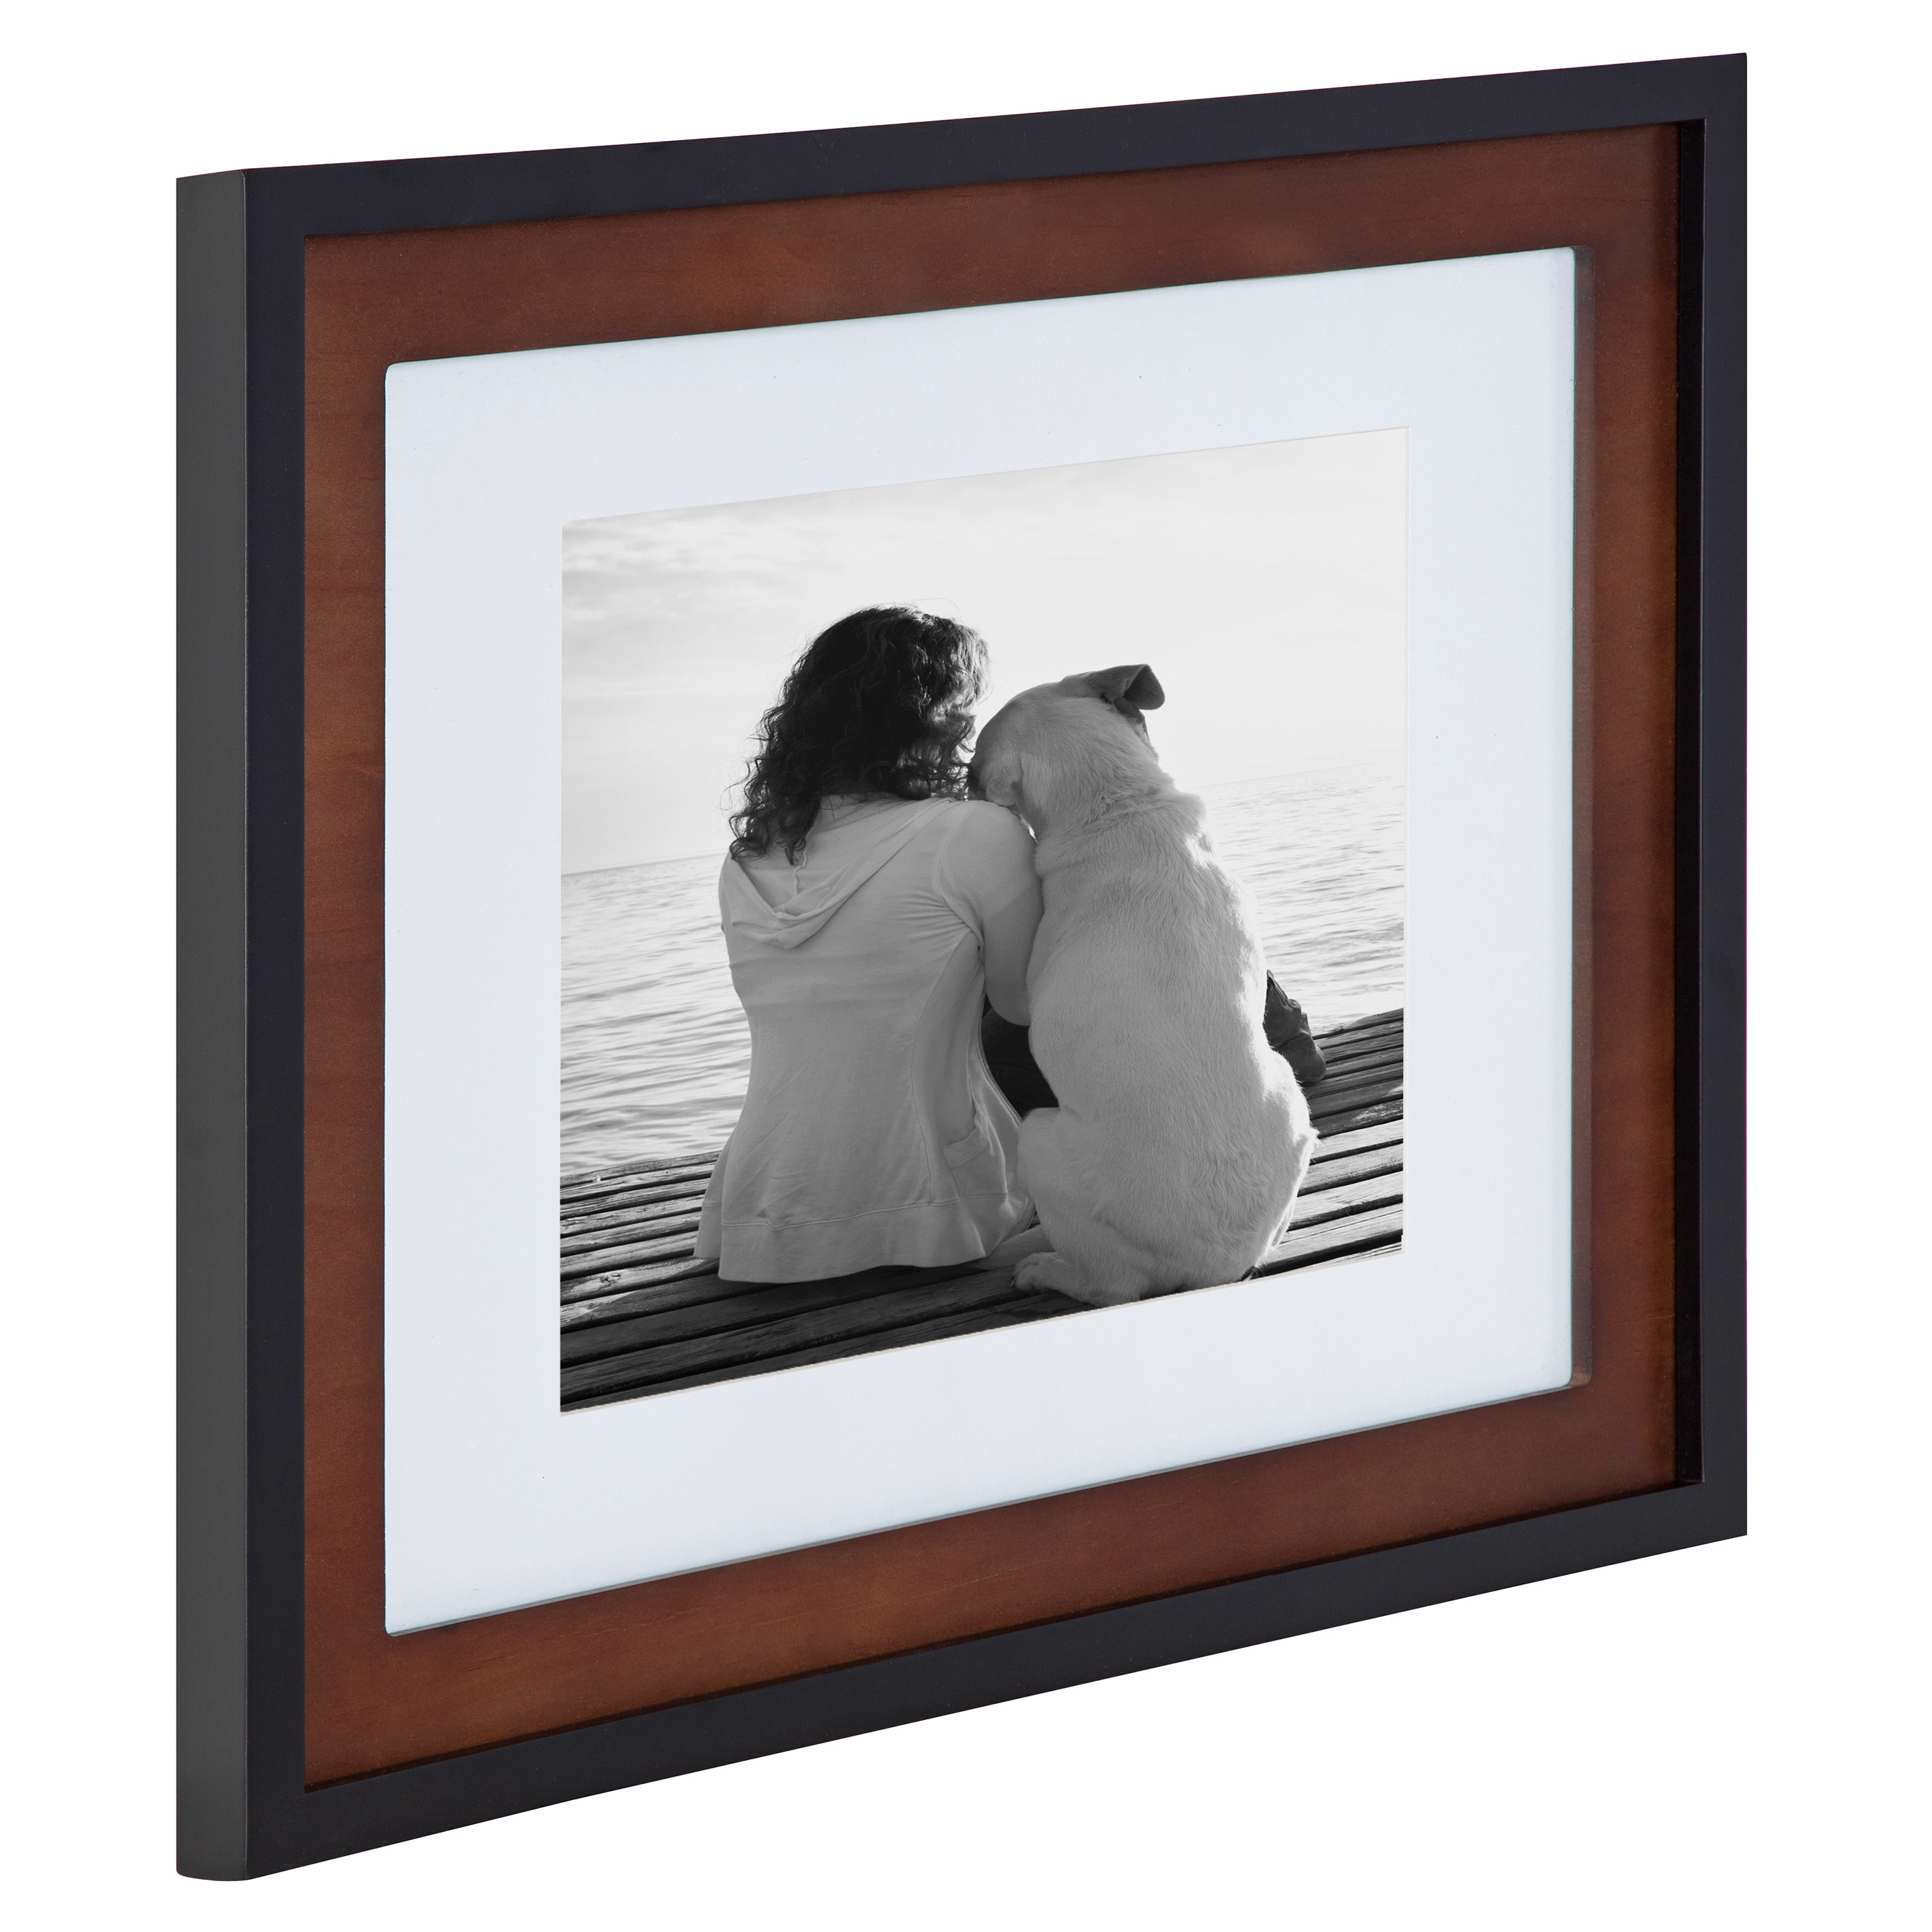 DesignOvation Black/Walnut Brown Wood Picture Frame (11-in x 14-in) at